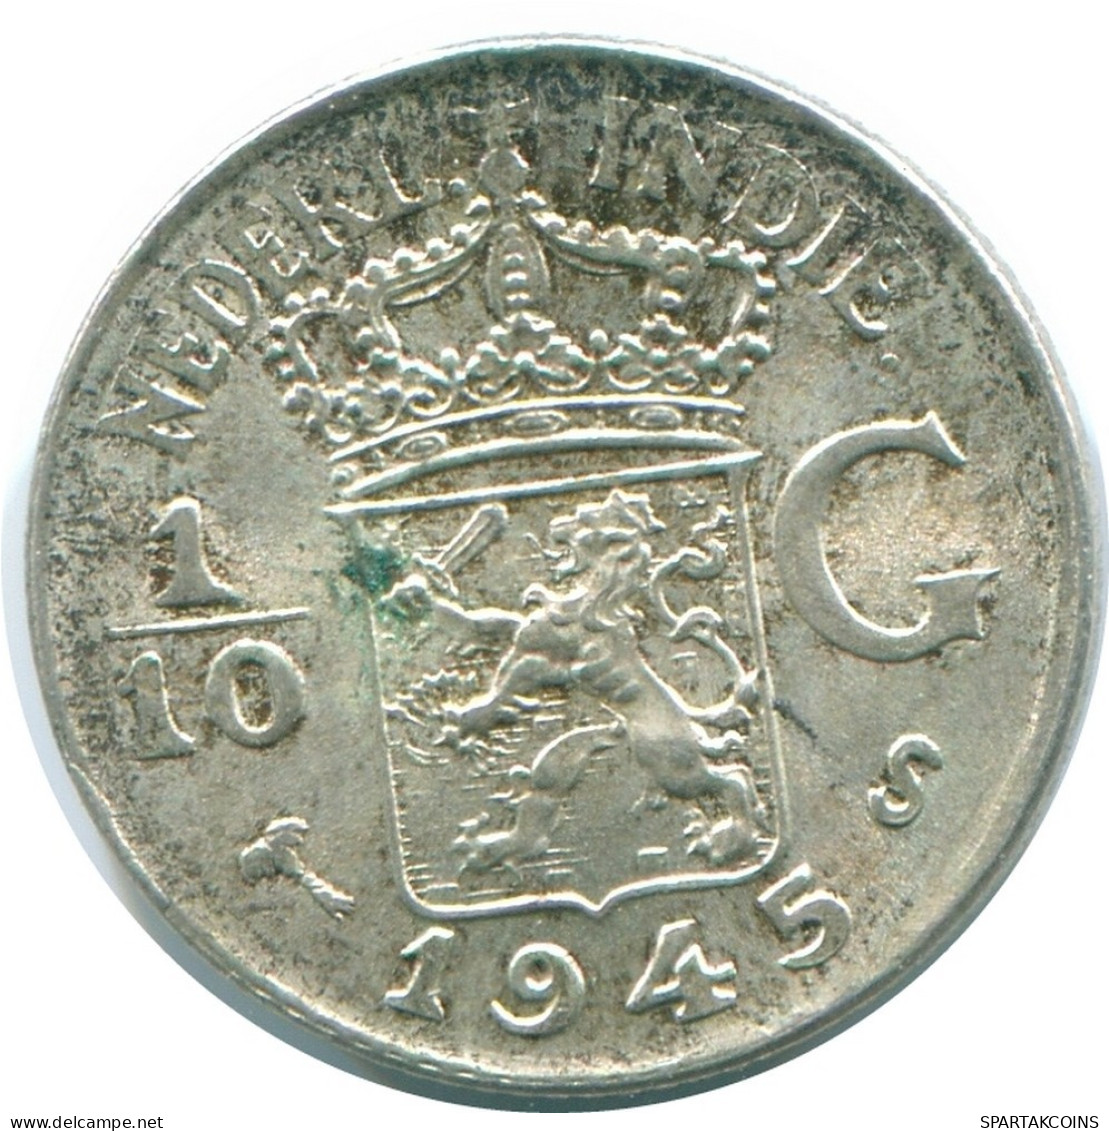 1/10 GULDEN 1945 S NETHERLANDS EAST INDIES SILVER Colonial Coin #NL14100.3.U.A - Indes Neerlandesas